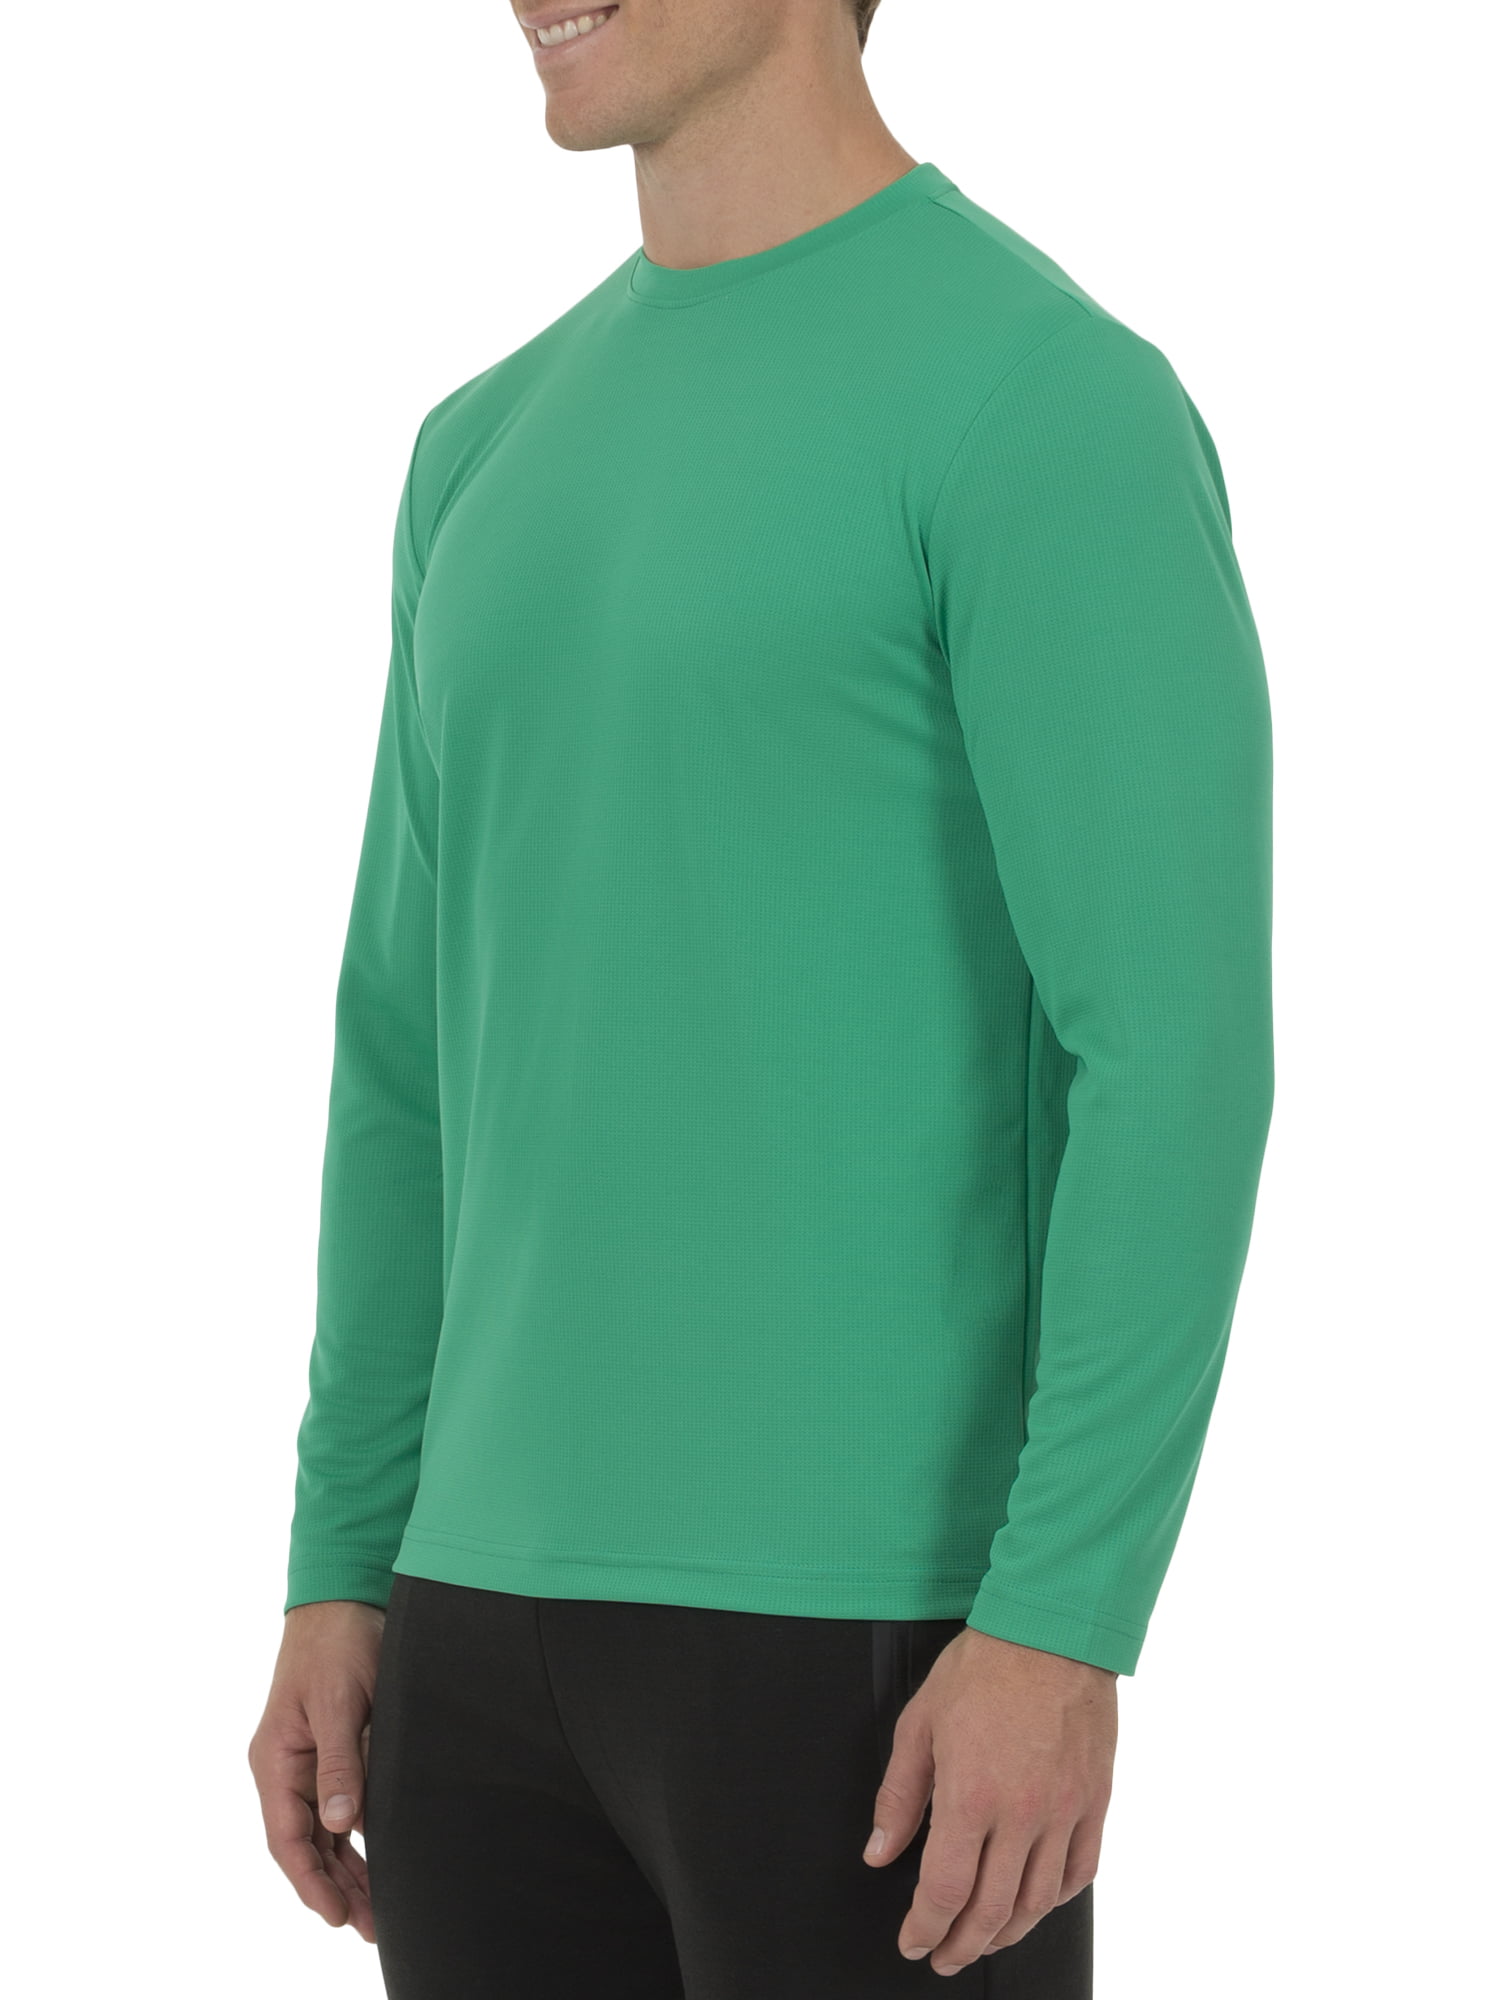 athletic works regular fit quick dry tee